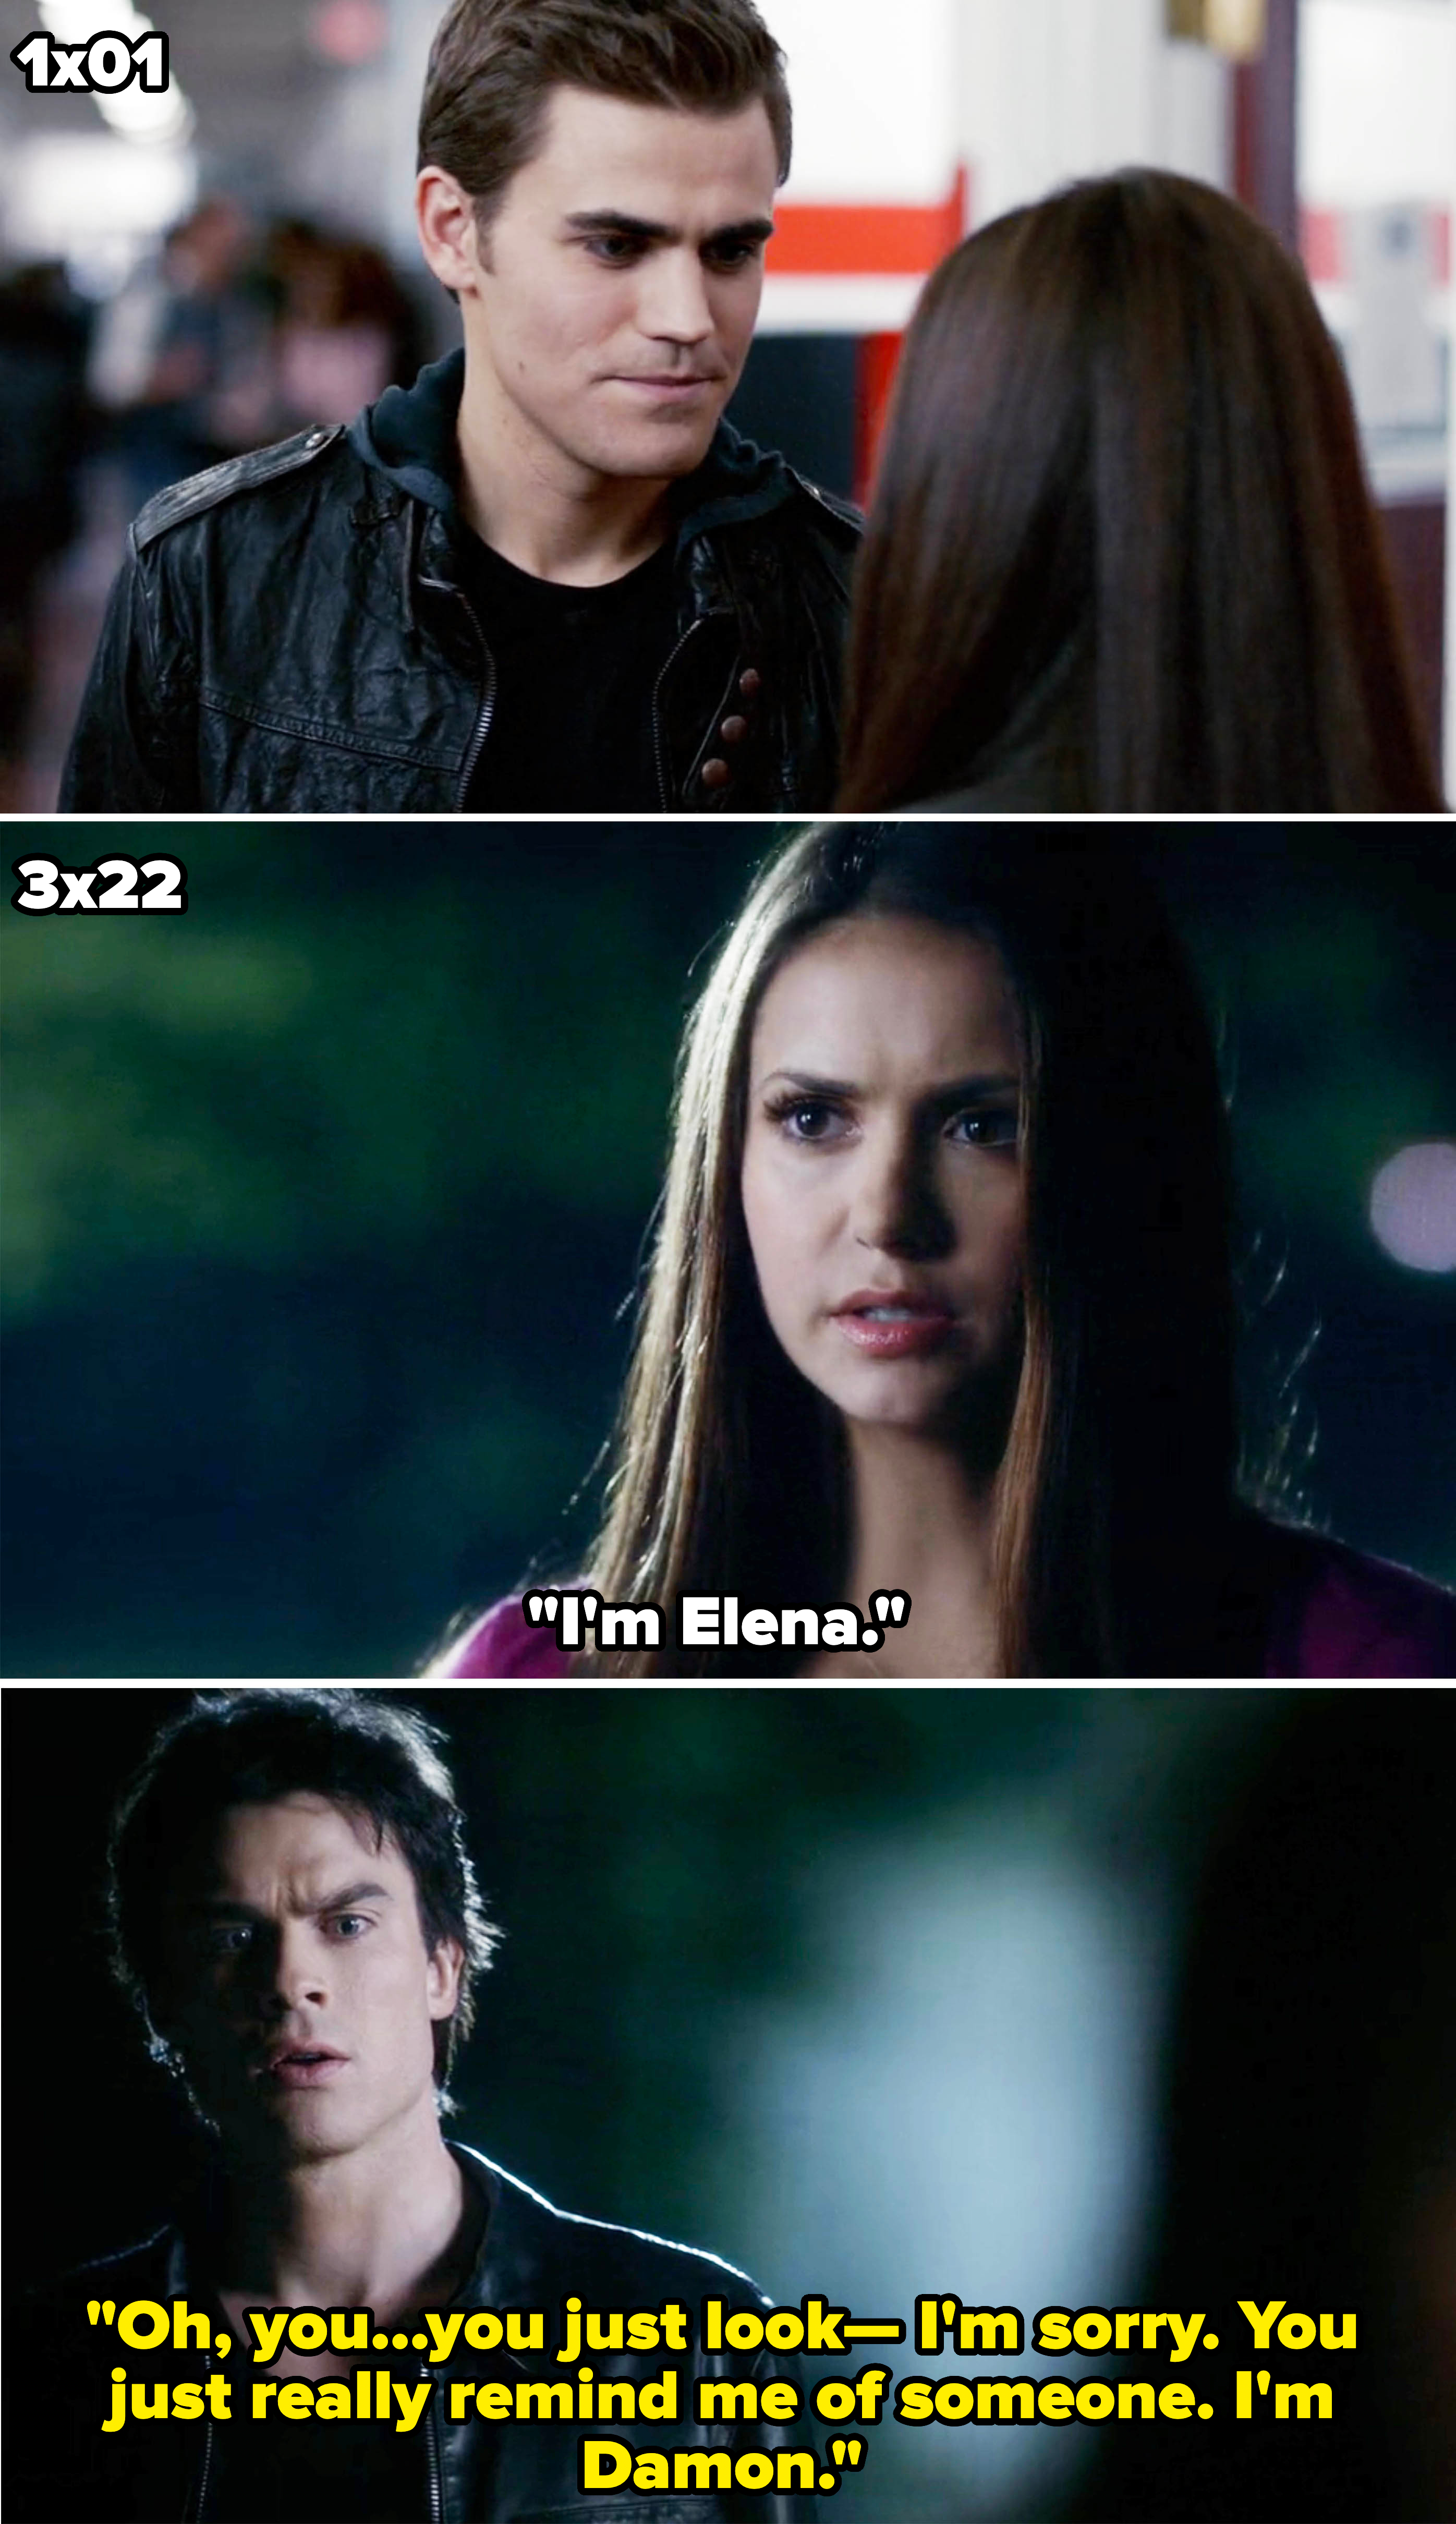 Three separate images from a TV show featuring characters Stefan Salvatore, Elena Gilbert, and Damon Salvatore in a tense scene